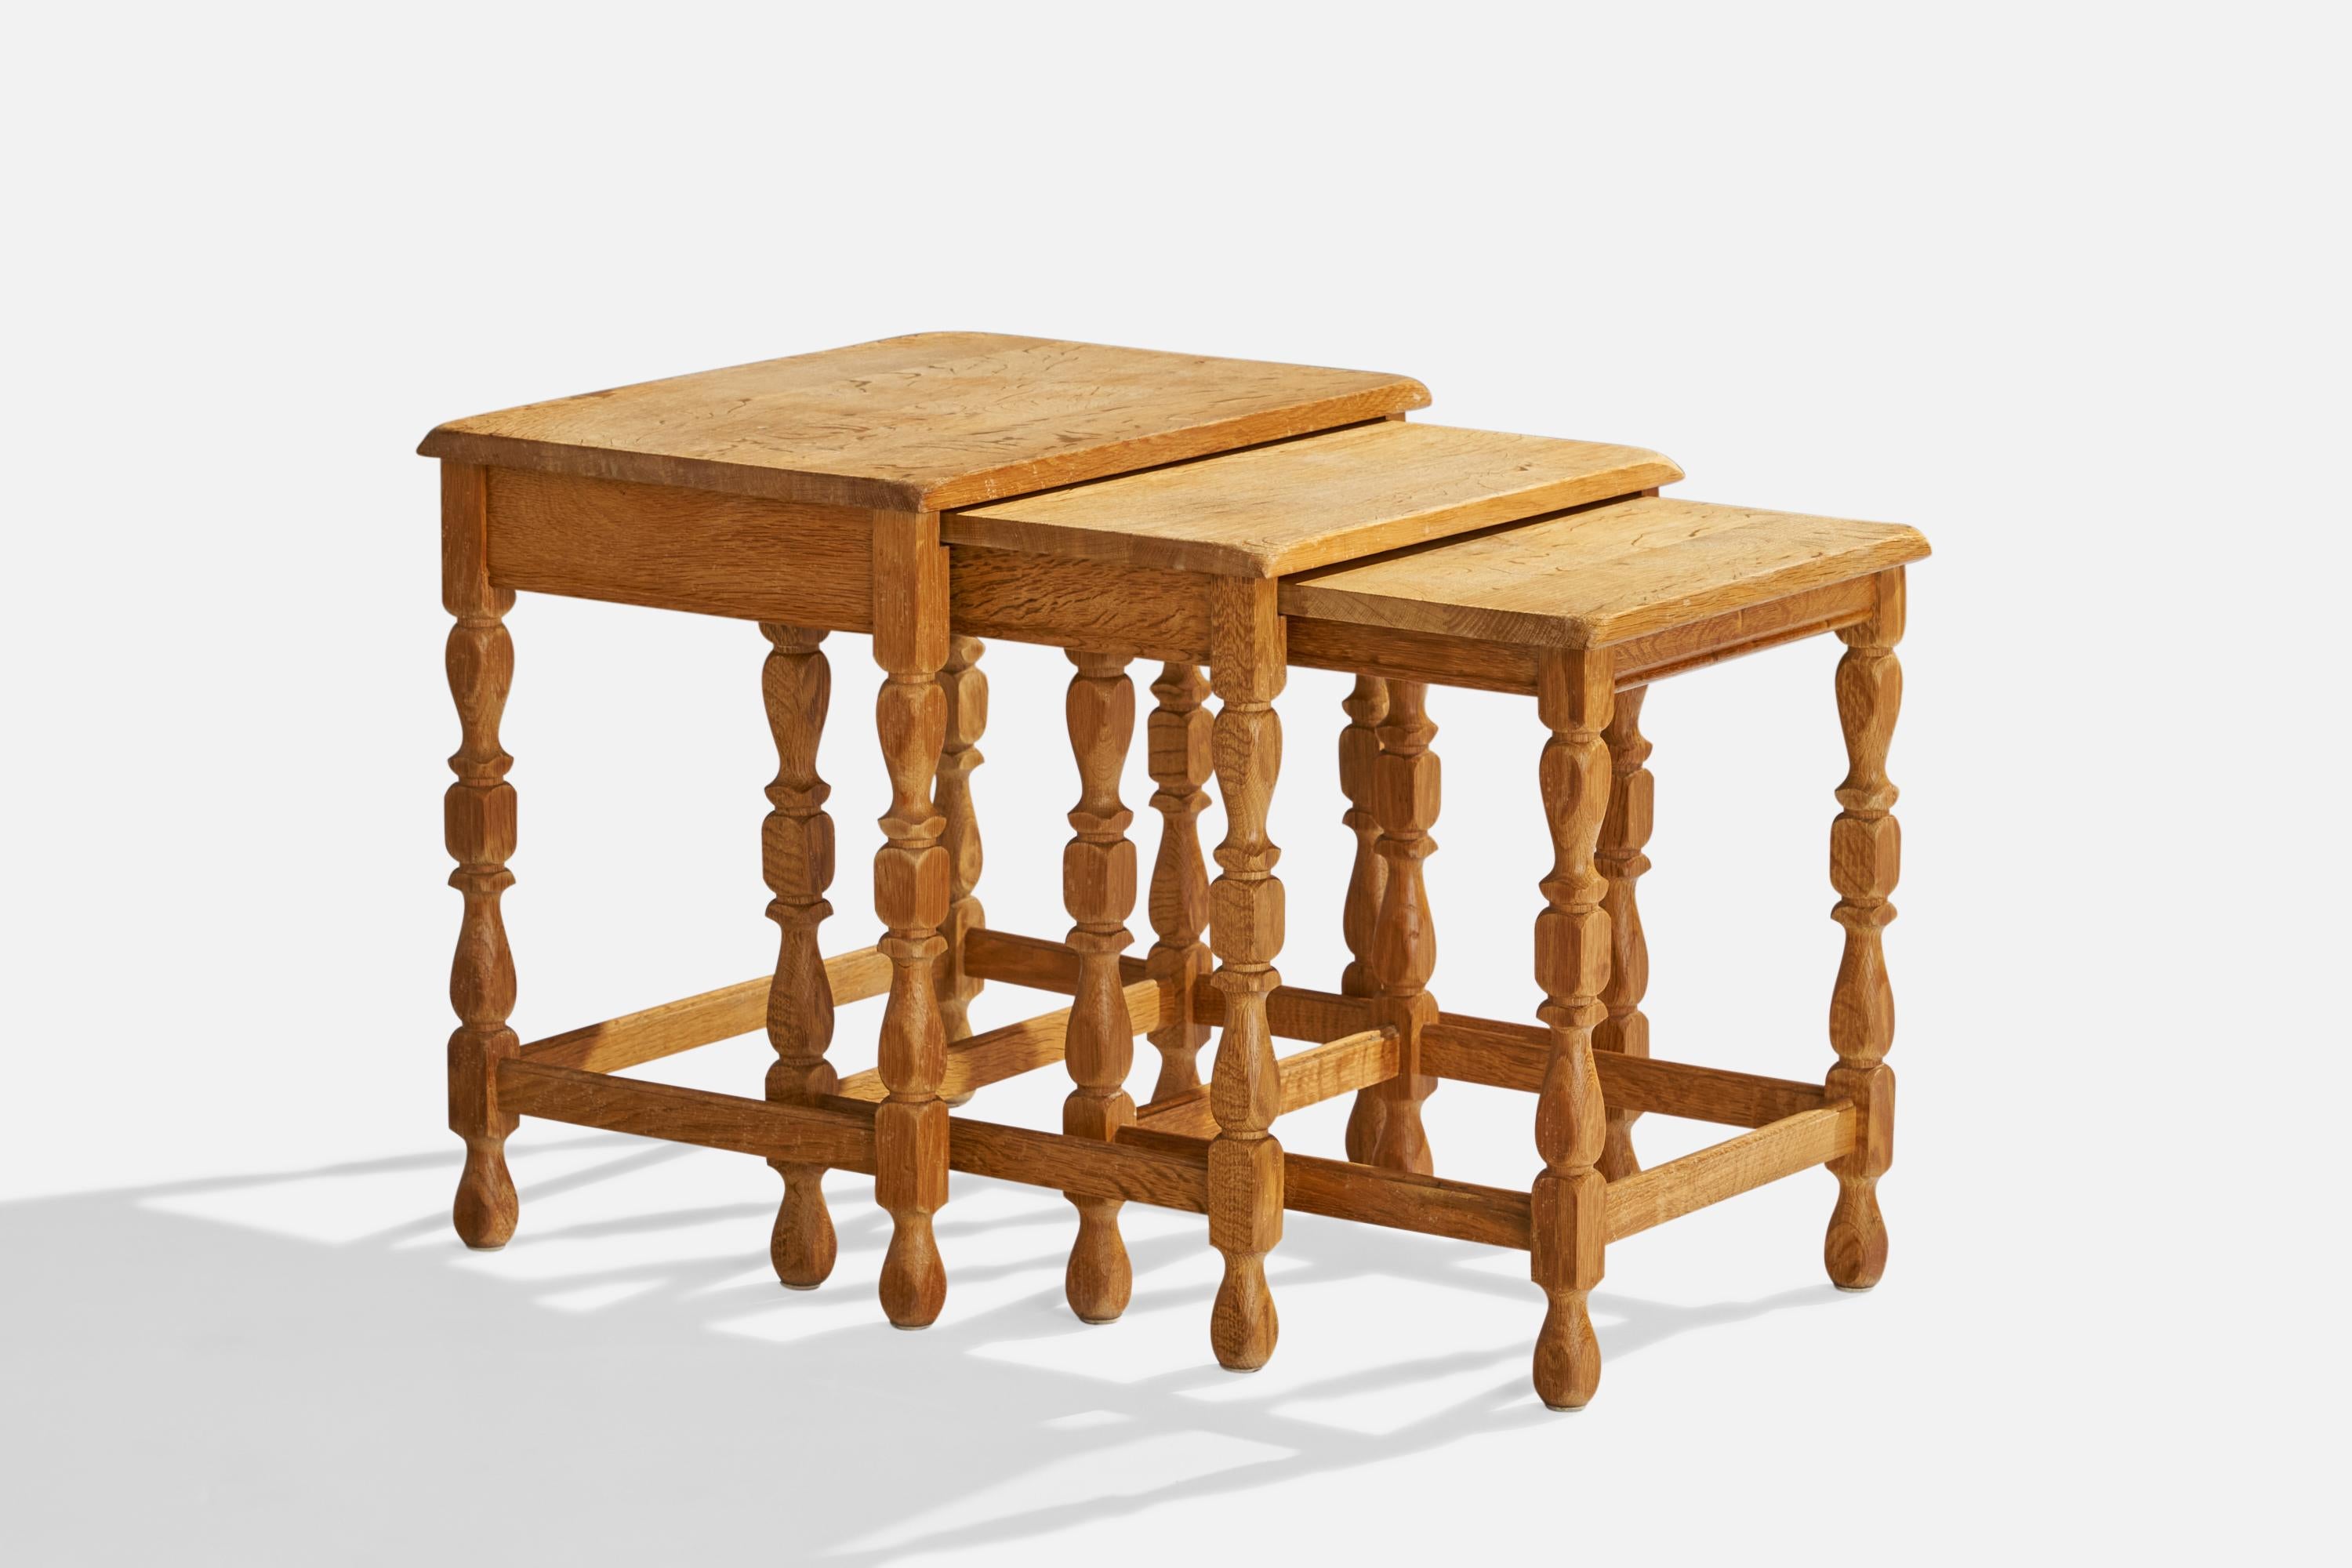 A set of 3 oak nesting tables designed and produced in Denmark, c. 1930s.

Second table measurements 19.75” H x 18.5” W x 15.5” D
Third table measurements 18.75” H x 15.5” W x 15.5” D